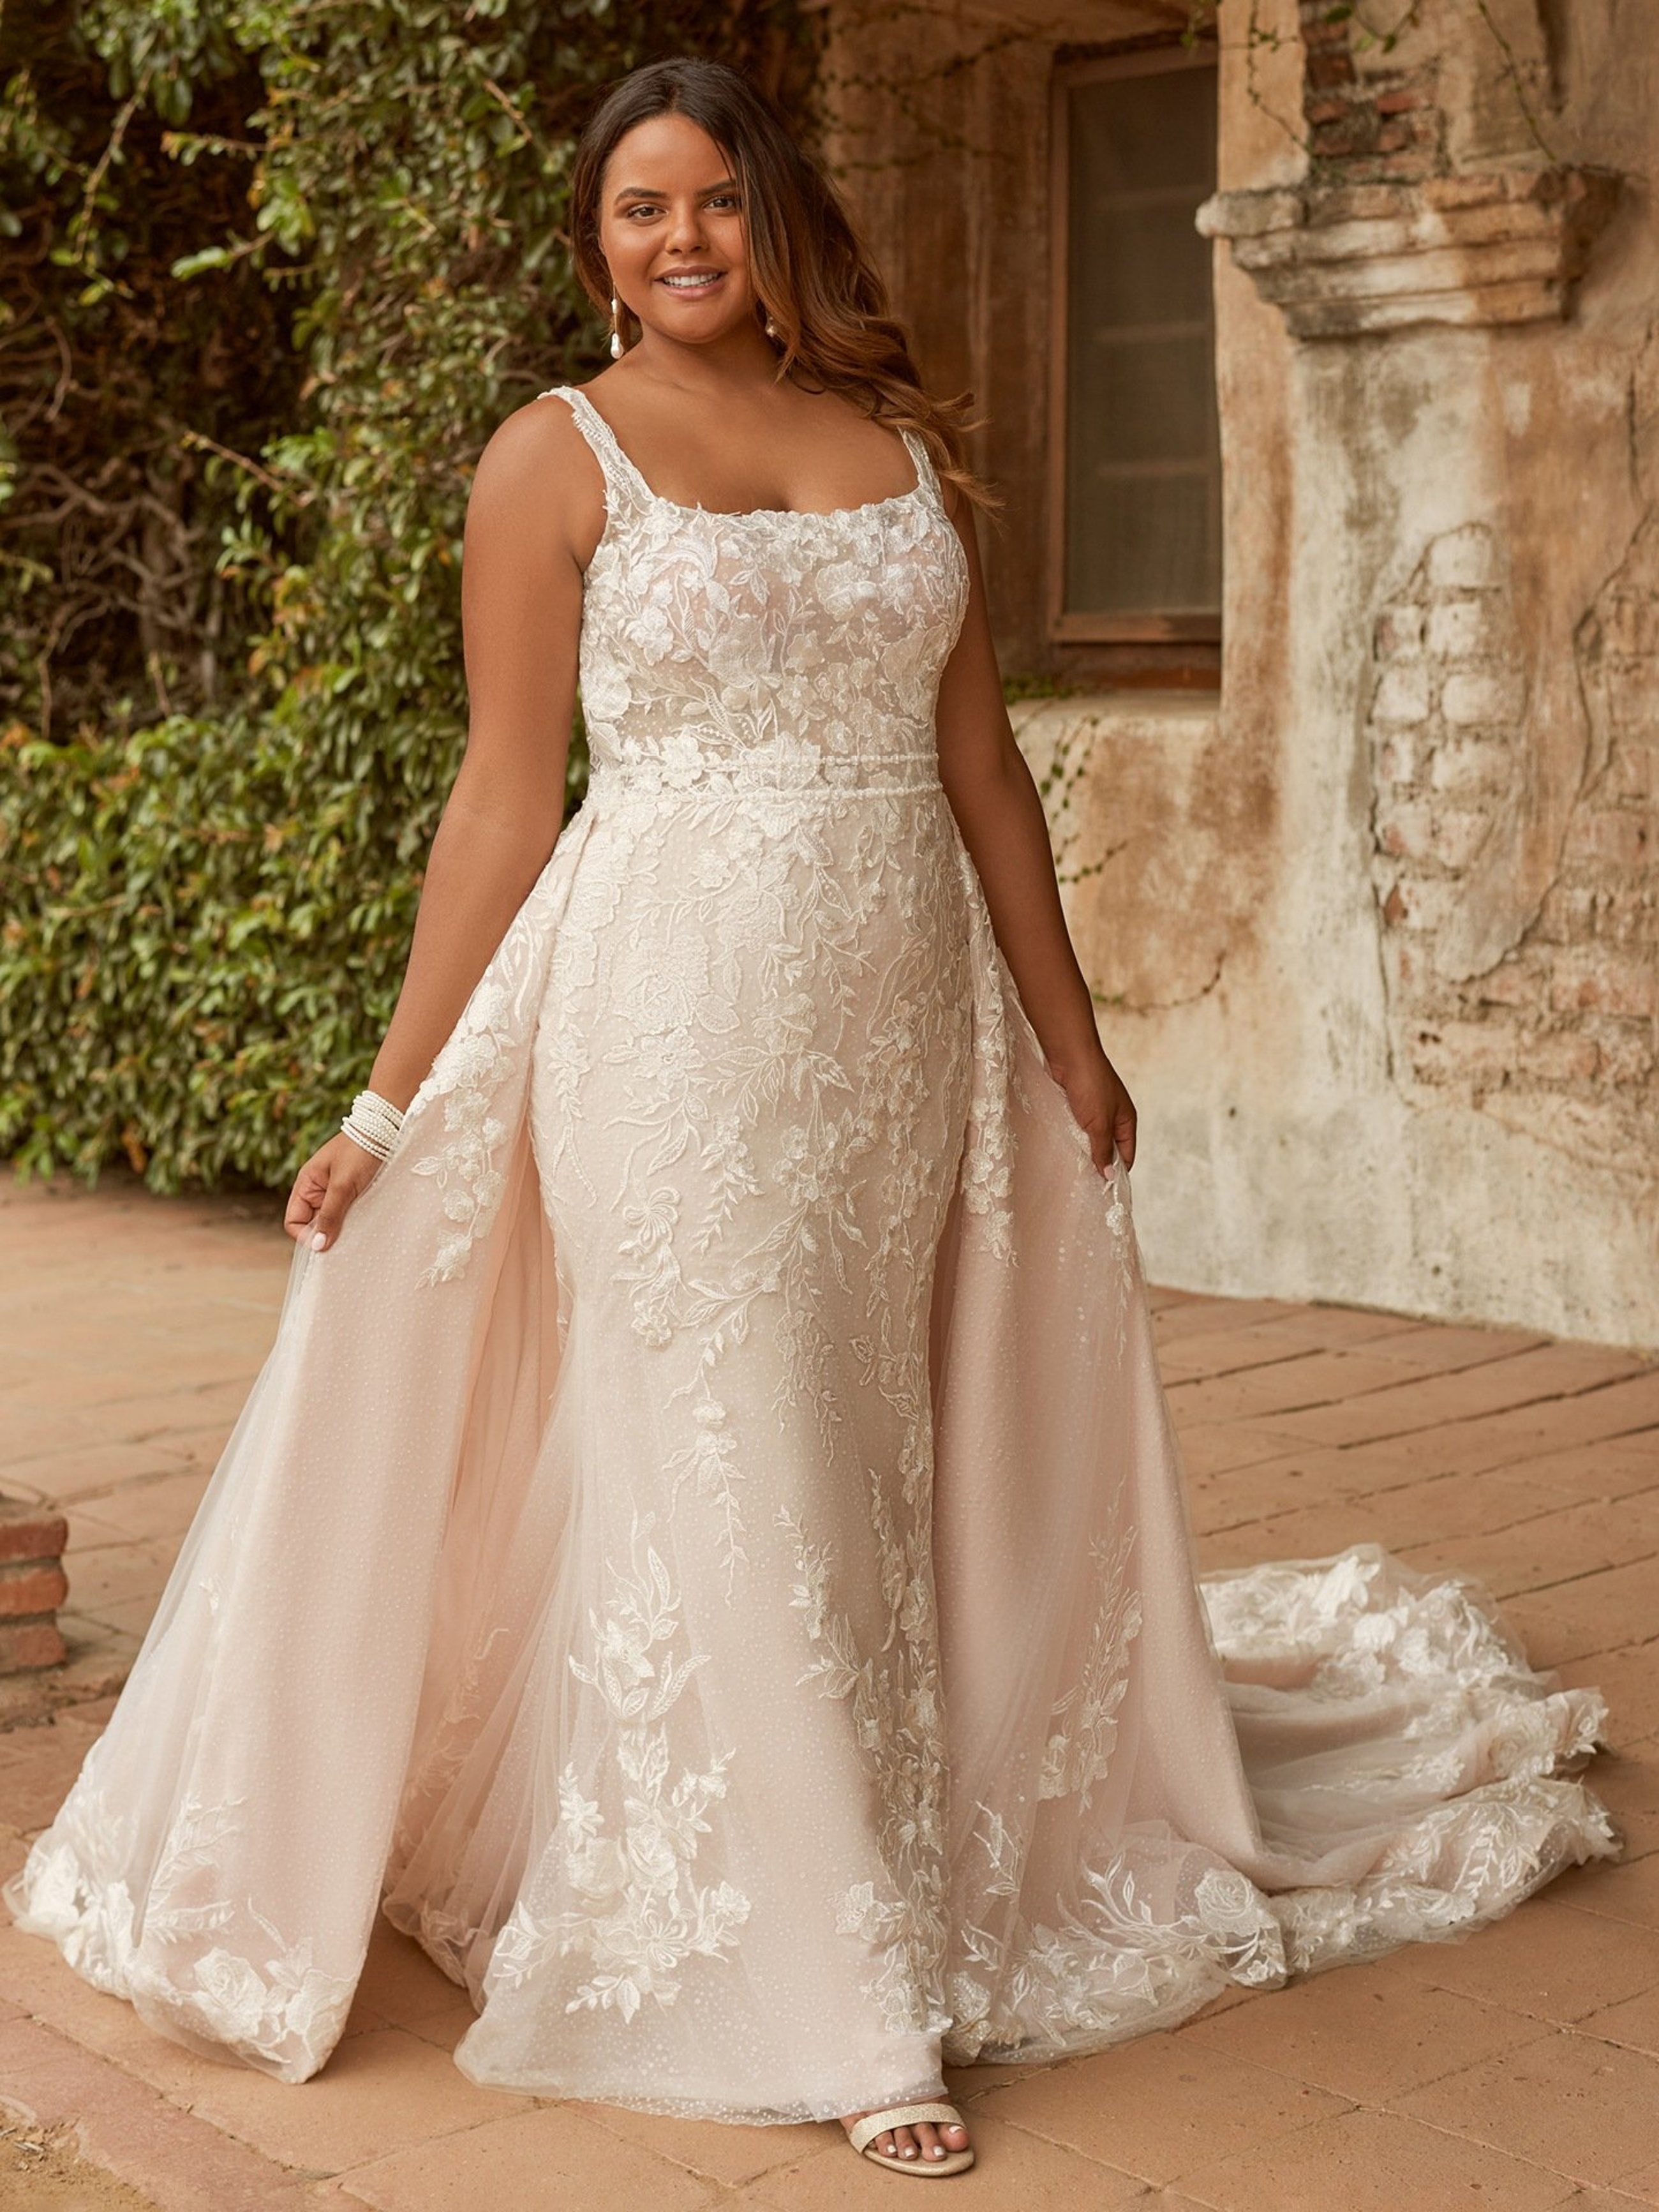 Maggie Sottero In Store Styles Plus Size Plus Dresses Bridal